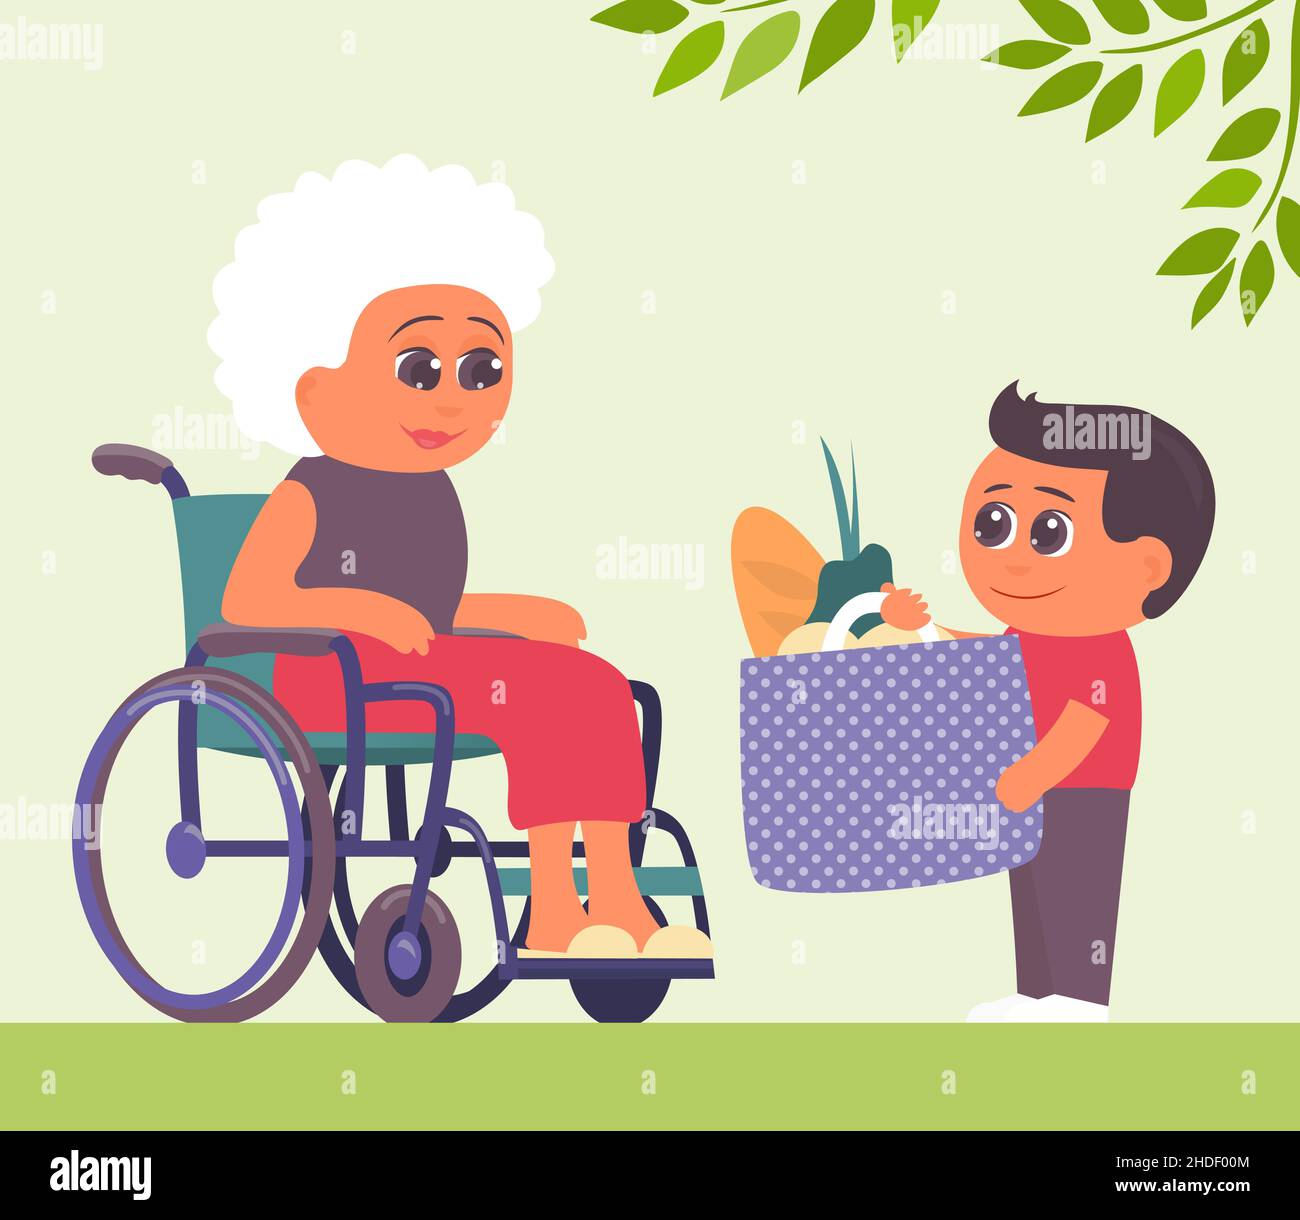 A little grandson brought food to his grandmother in a wheelchair. Caring for and helping the elderly. Family values. Vector cartoon illustration Stock Vector